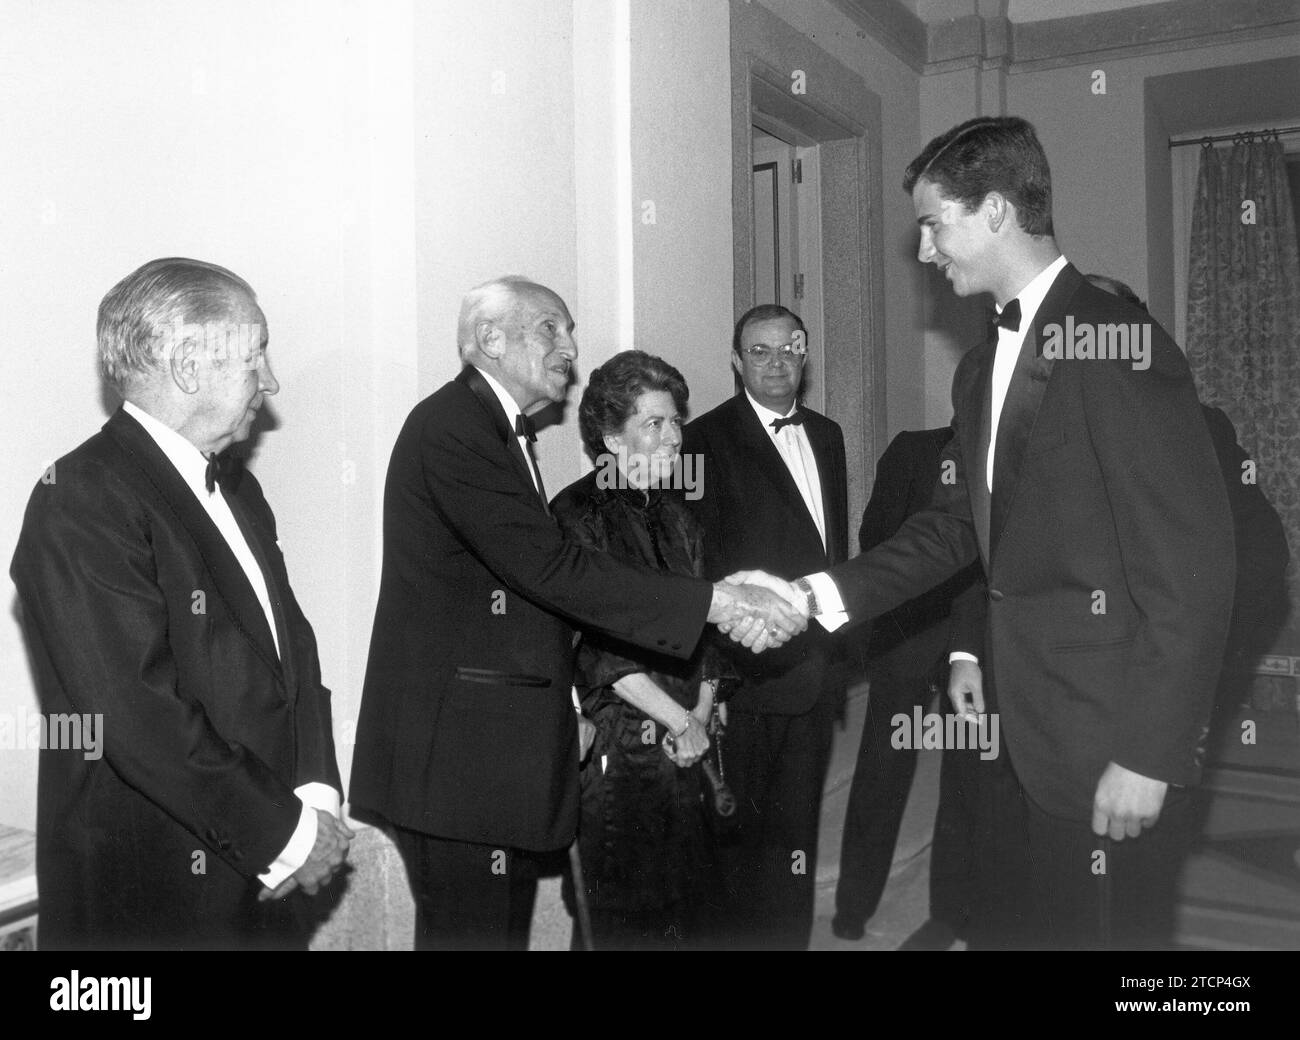 Madrid, 04/18/1989. Don Felipe offered a dinner at the El Pardo Palace to the patrons of the Prince of Asturias Foundation. In the image, the then Prince greets Nobel Prize winner Severo Ochoa. Credit: Album / Archivo ABC Stock Photo